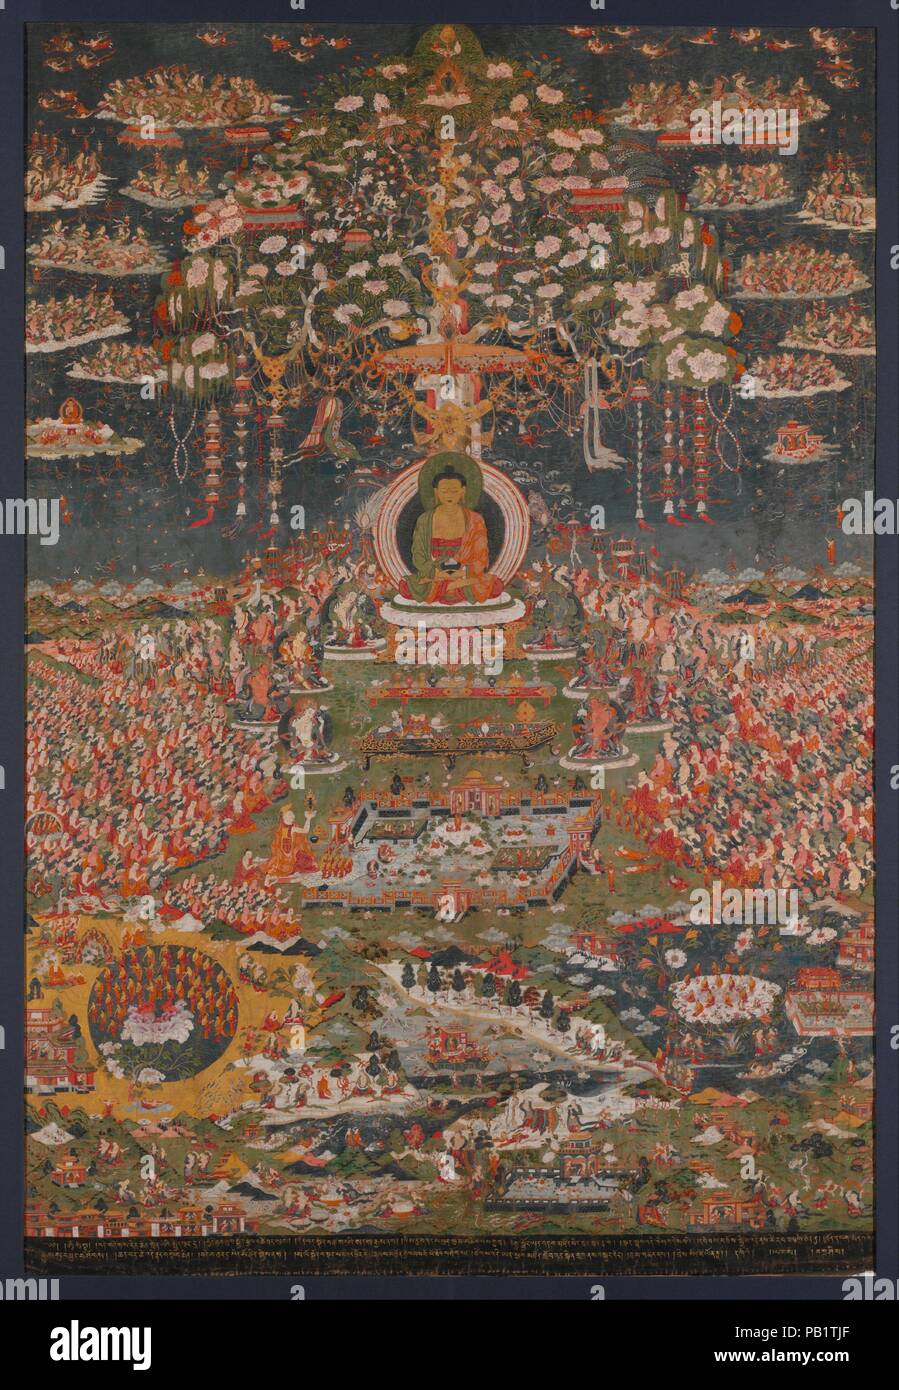 Amitabha, the Buddha of the Western Pure Land (Sukhavati). Culture: Central Tibet. Dimensions: 56 1/4 × 39 1/2 in. (142.9 × 100.3 cm). Date: ca. 1700.  Amitayus, the Buddha of Eternal Life, is also known as Amitabha, one of the five Cosmic Buddhas of Esoteric Buddhism. He is shown in his paradise, Sukhavati, the Western Pure Land, enthroned beneath a flowering tree festooned with strands of jewels and auspicious symbols. To either side the sky is filled with throngs of ecstatic demigods who bear offerings and scatter flowers. Seated below are the eight great bodhisattvas, and between them are  Stock Photo